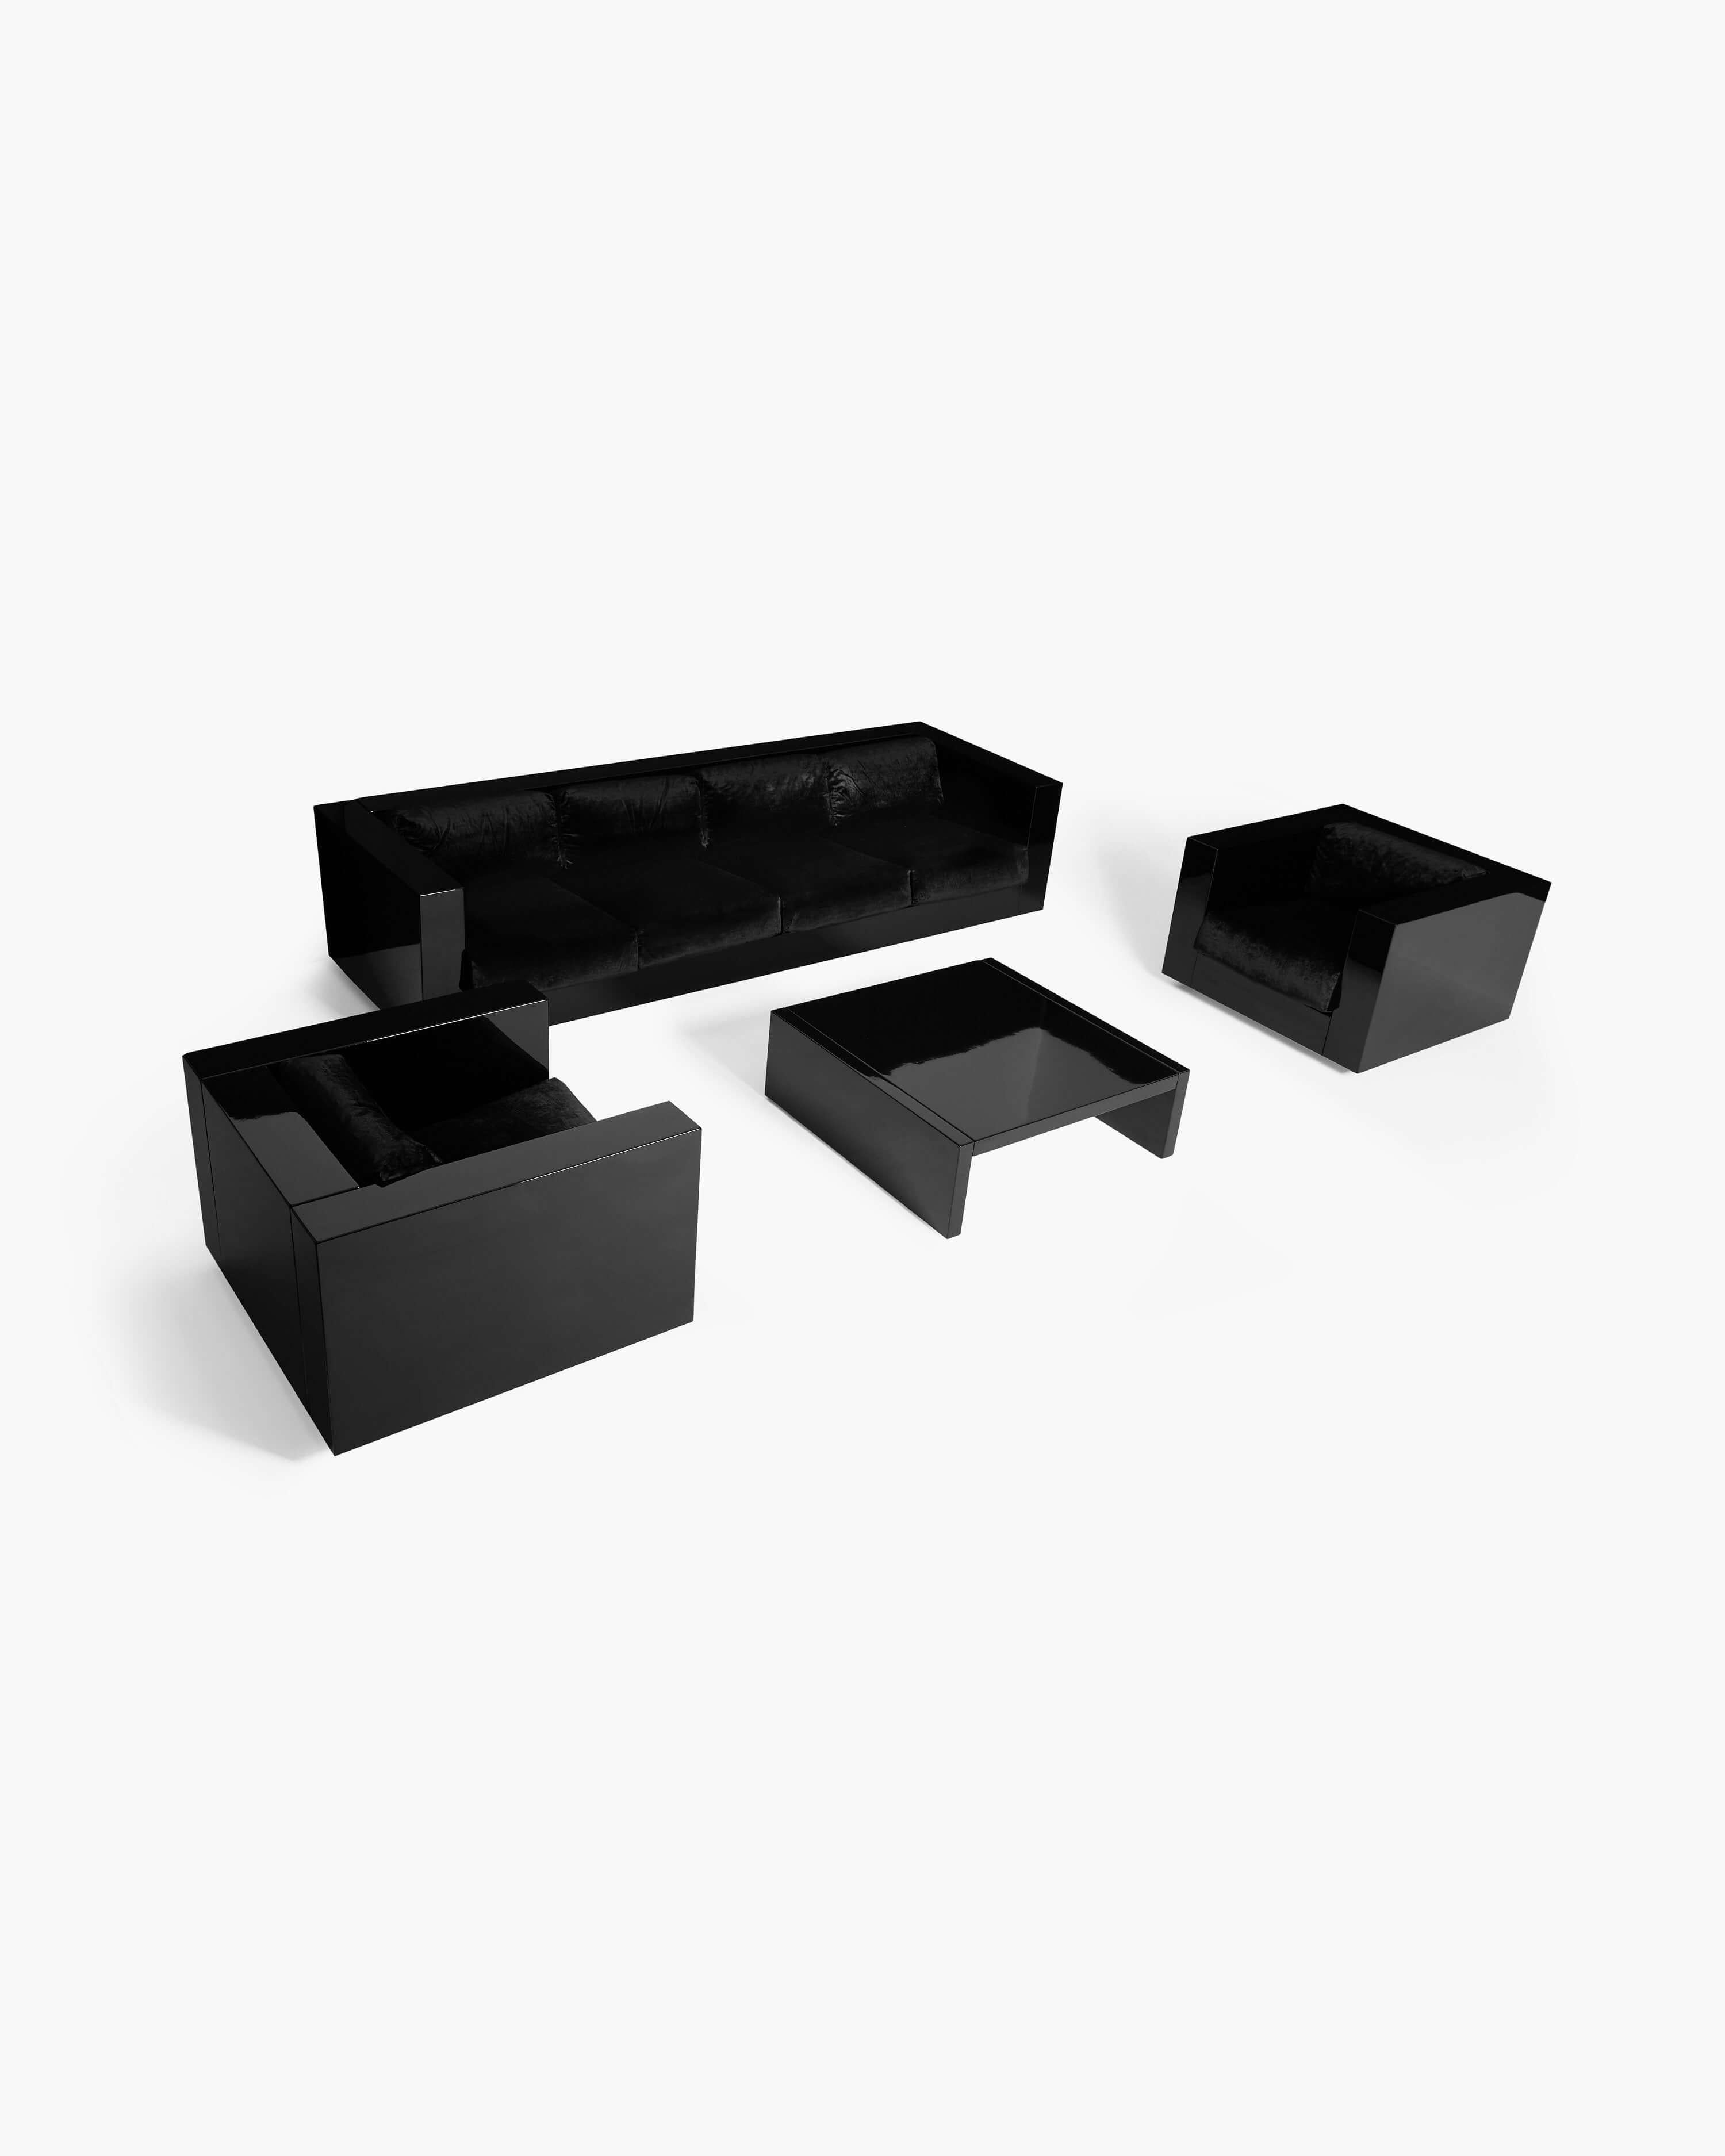 Designed by Italian couple Massimo and Lella Vignelli, this striking Saratoga living set for Poltronova manifests uninhibited cool, its rigid lines juxtaposed against sumptuous lacquered surfaces and velvet upholstery. 

The set includes a prototype